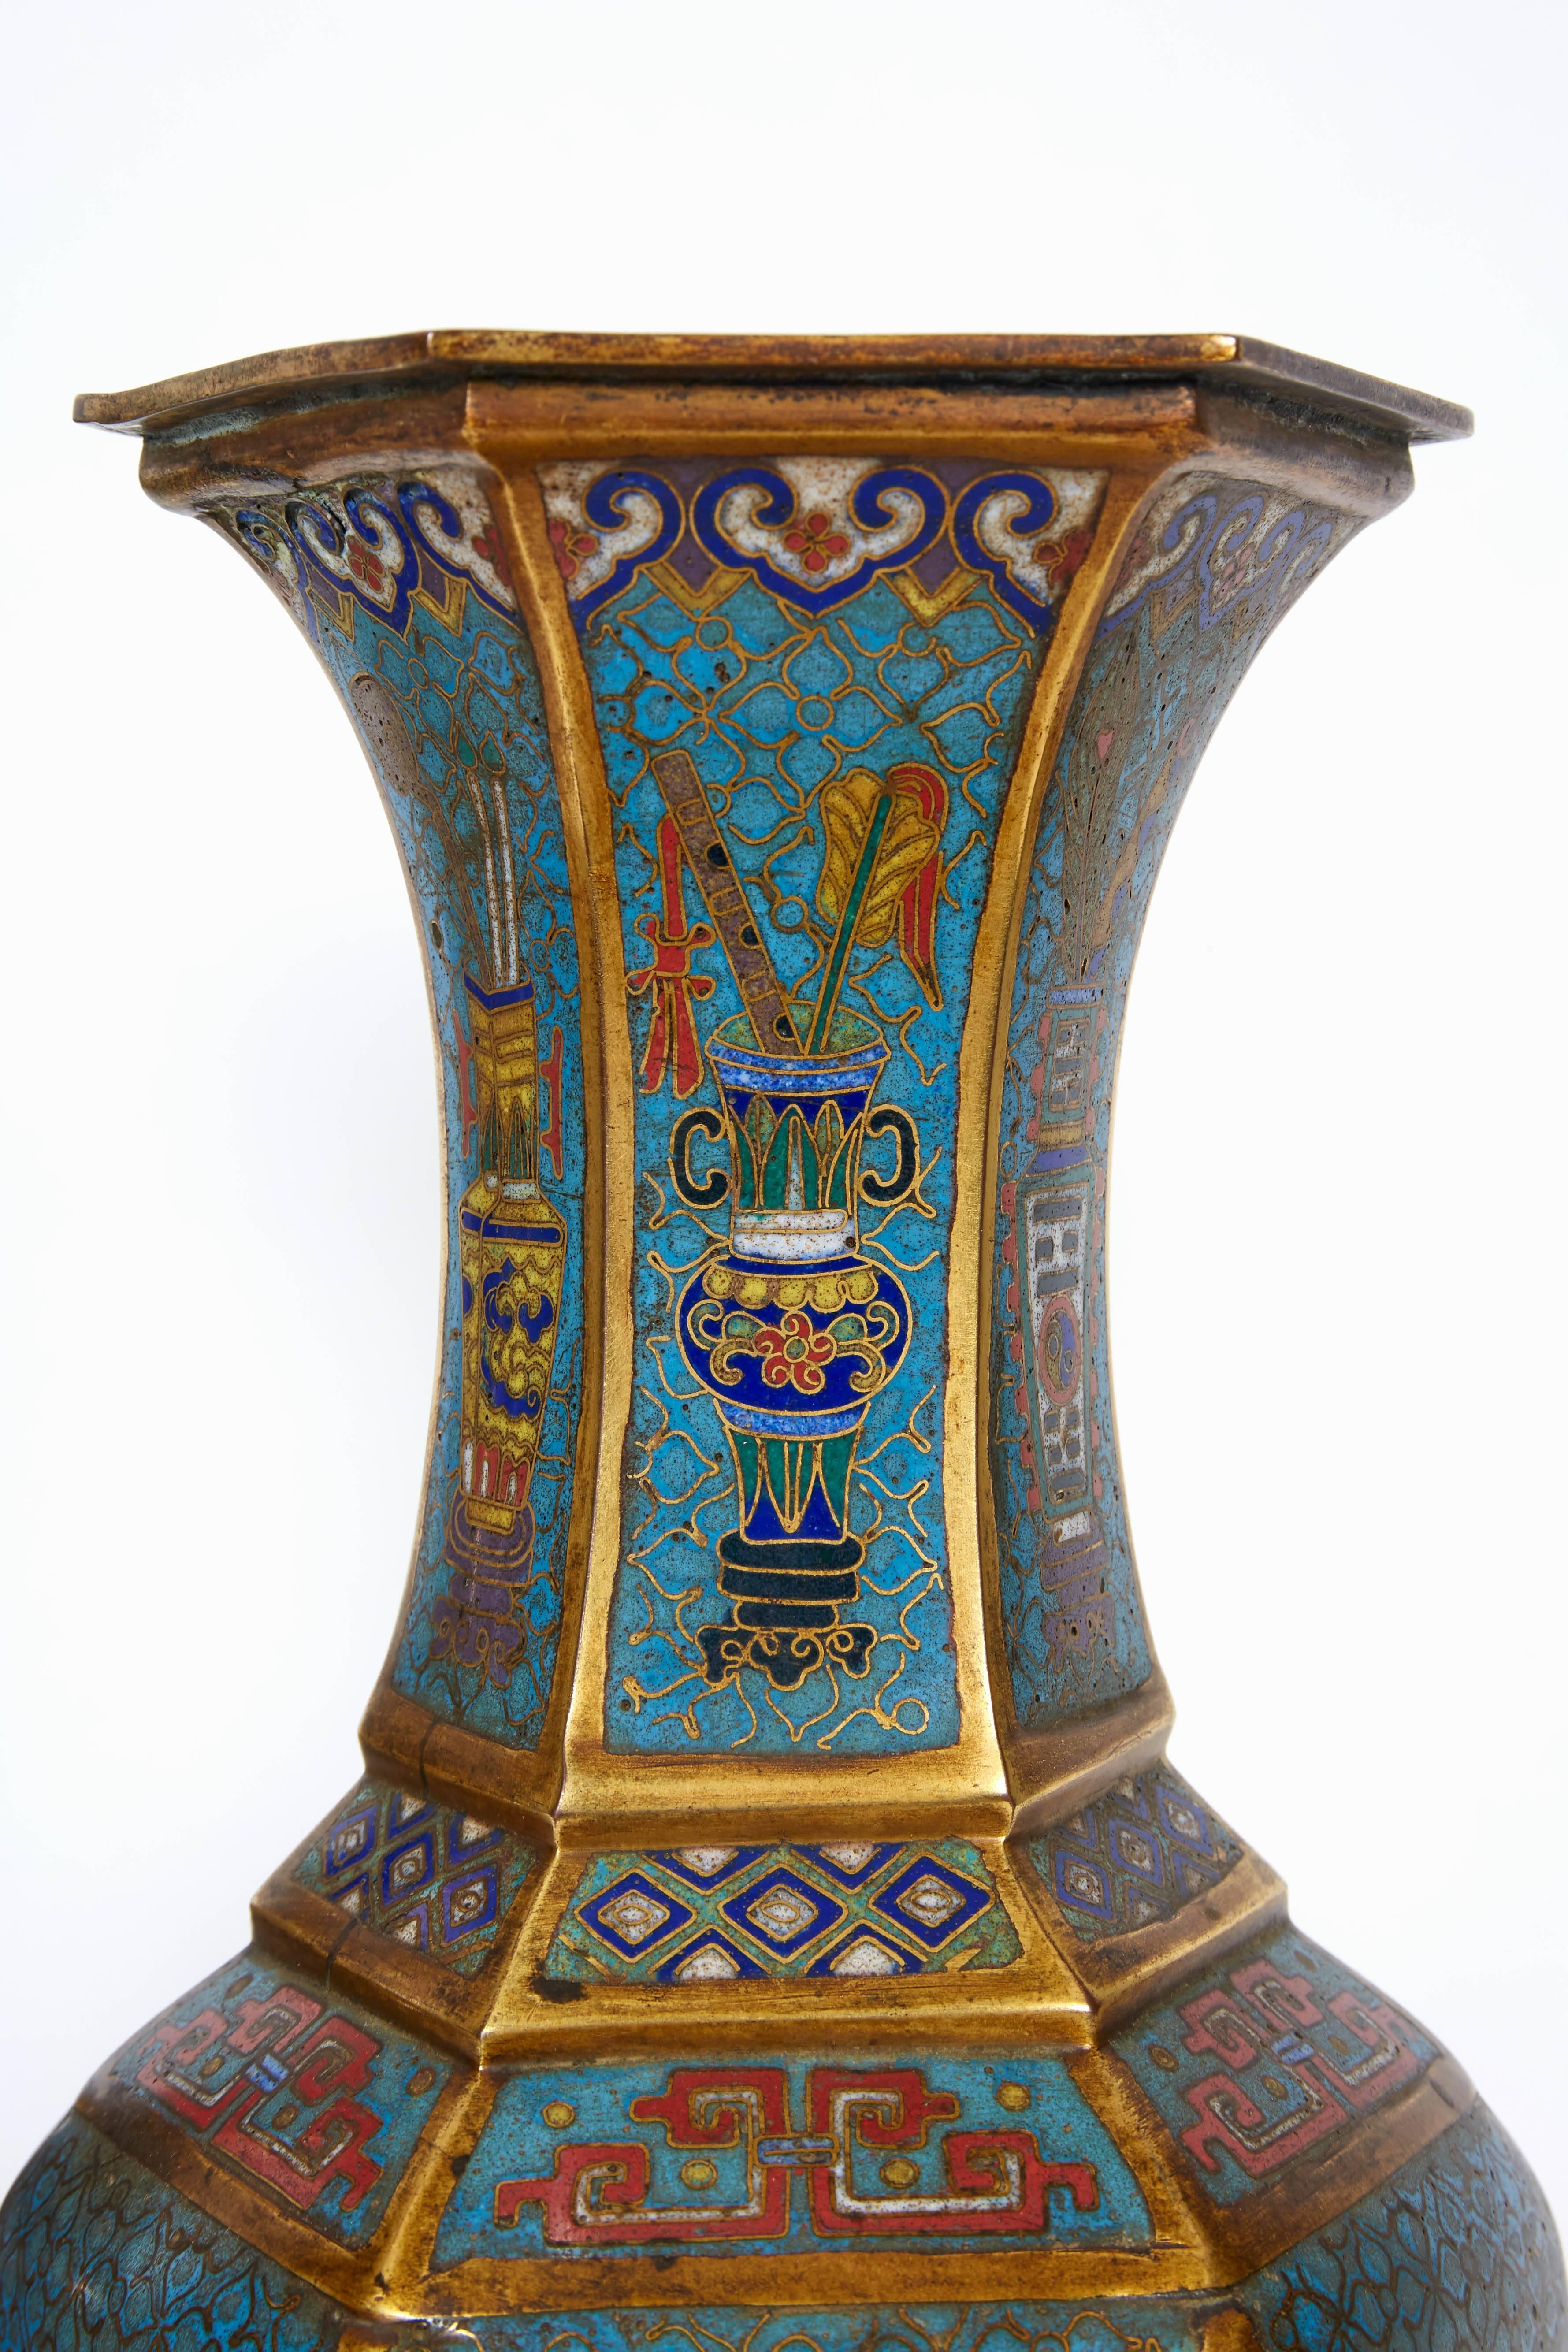 Pair of Blue Chinese Cloisonne Enamel Vases, Qing Dynasty, Qianlong Period 1